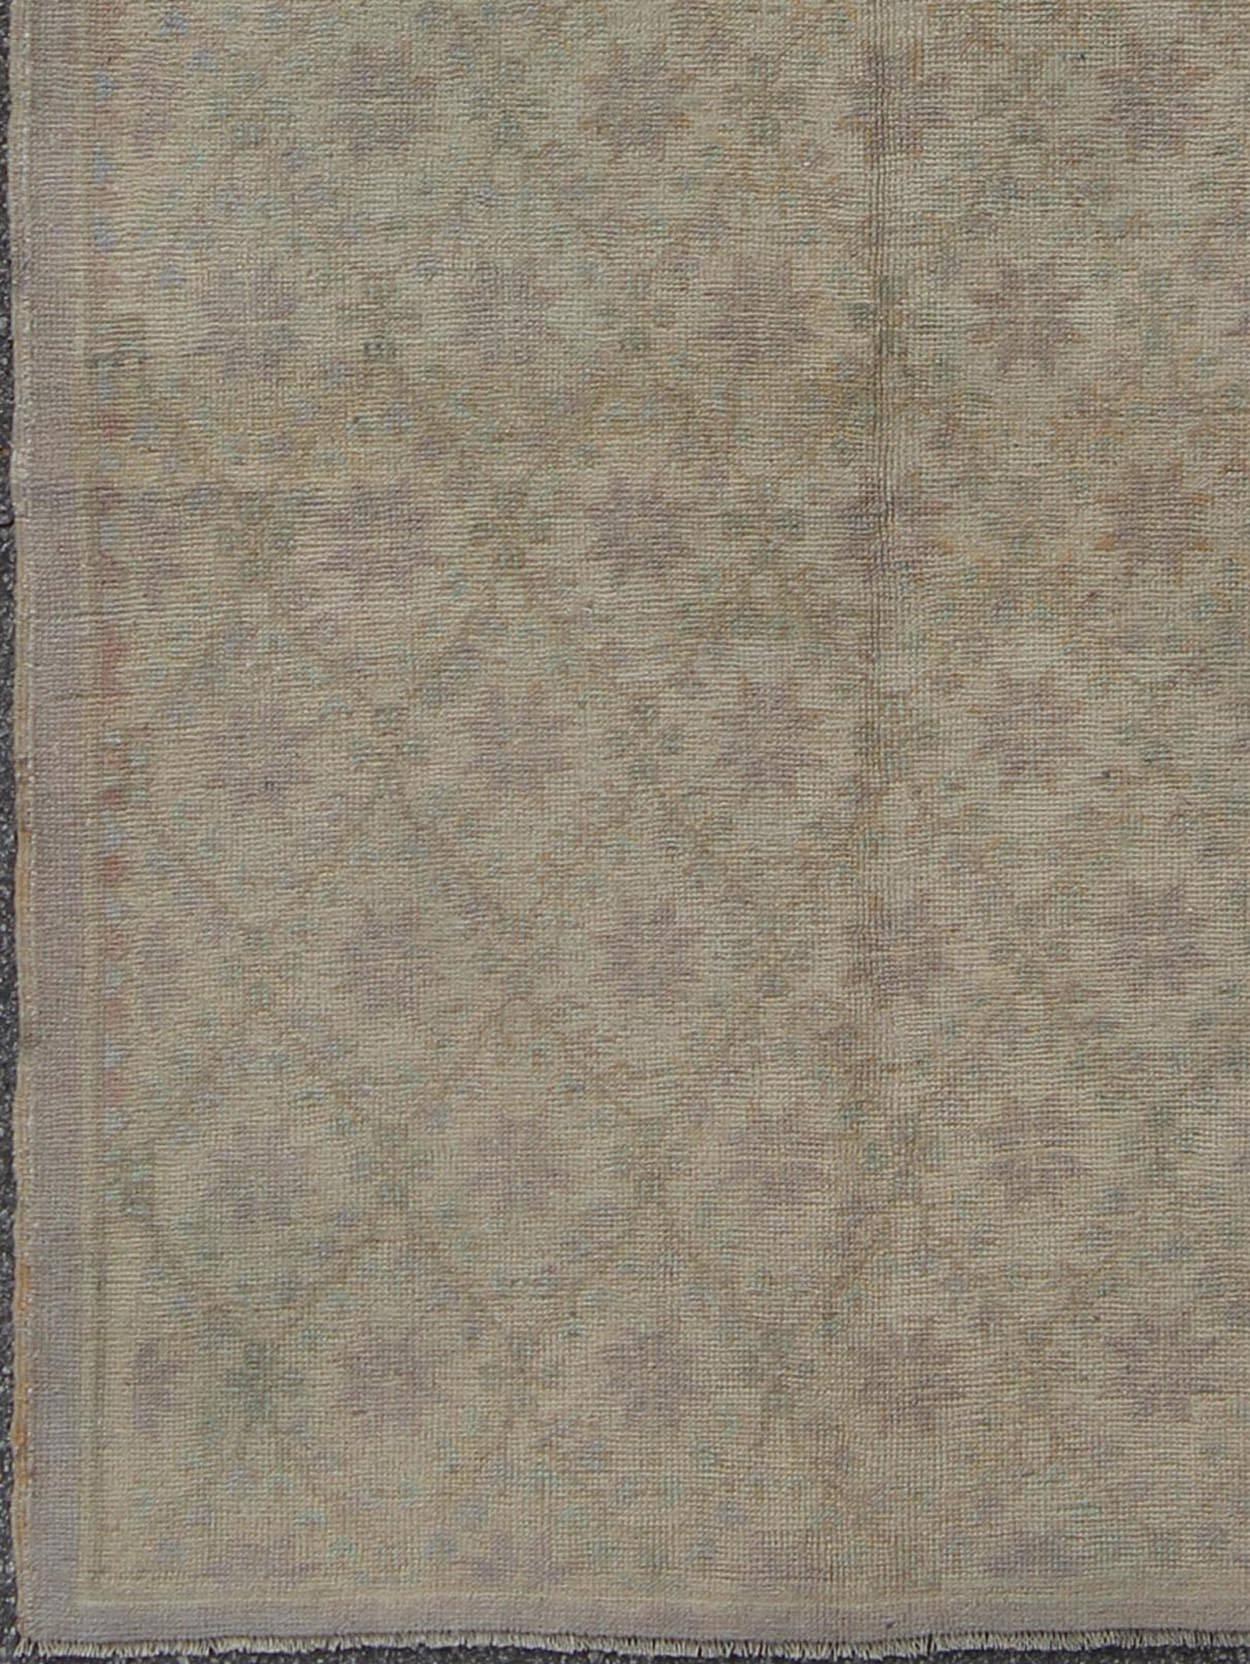 This Oushak carpet (circa mid-20th century) features an all-over pattern of mini blossom-like flowers spreading throughout the central field. Colors include various shades of taupe and gray. The rugs' qualities are enhanced by its lustrous